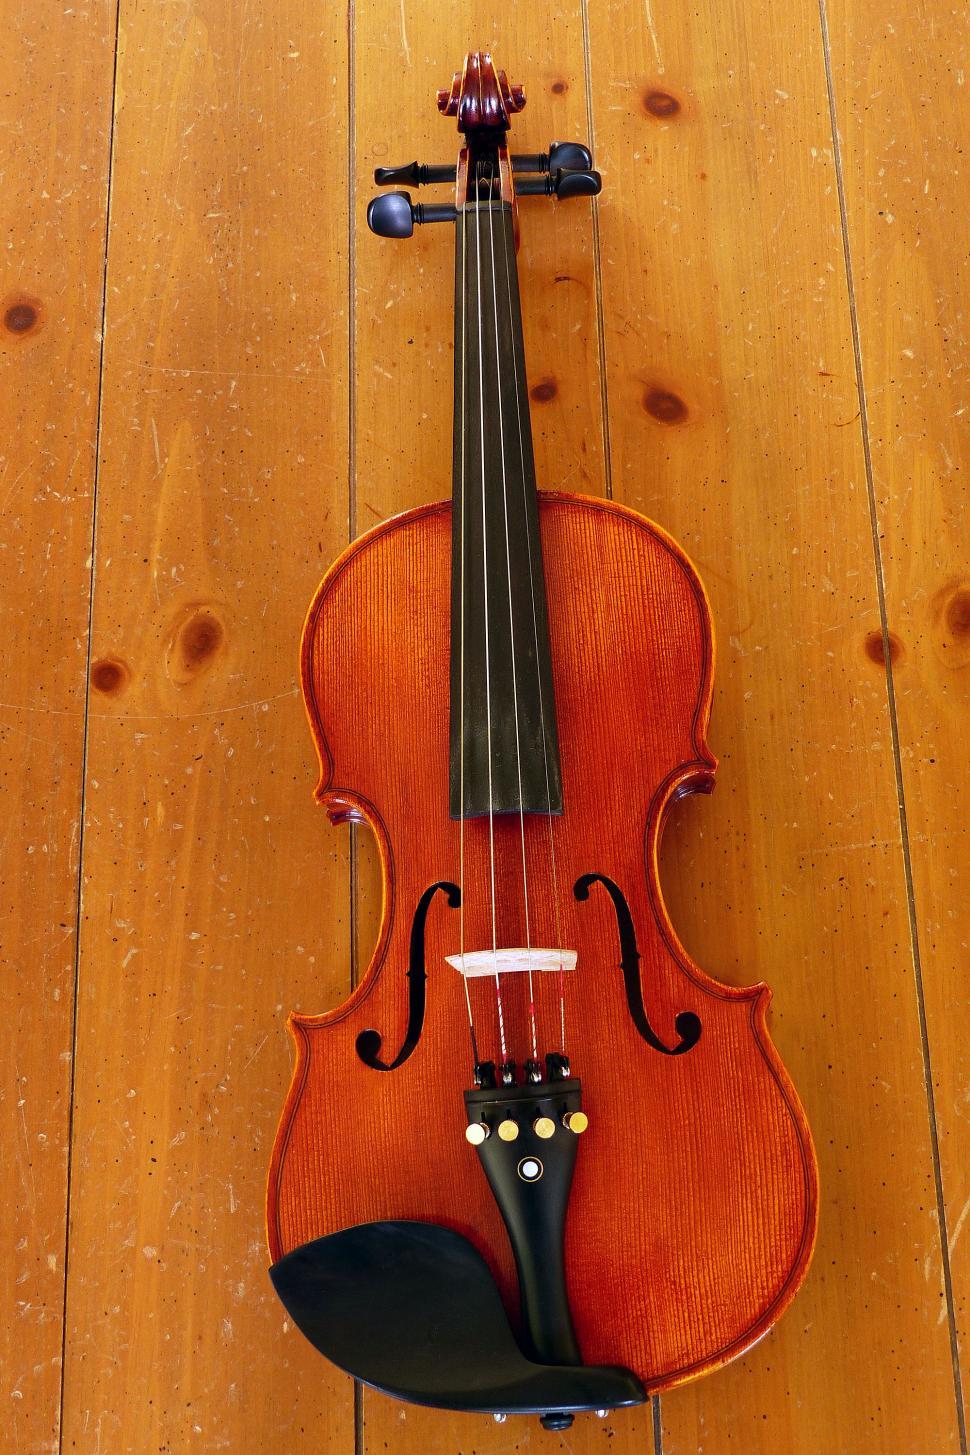 Free Image of Violin On Table 